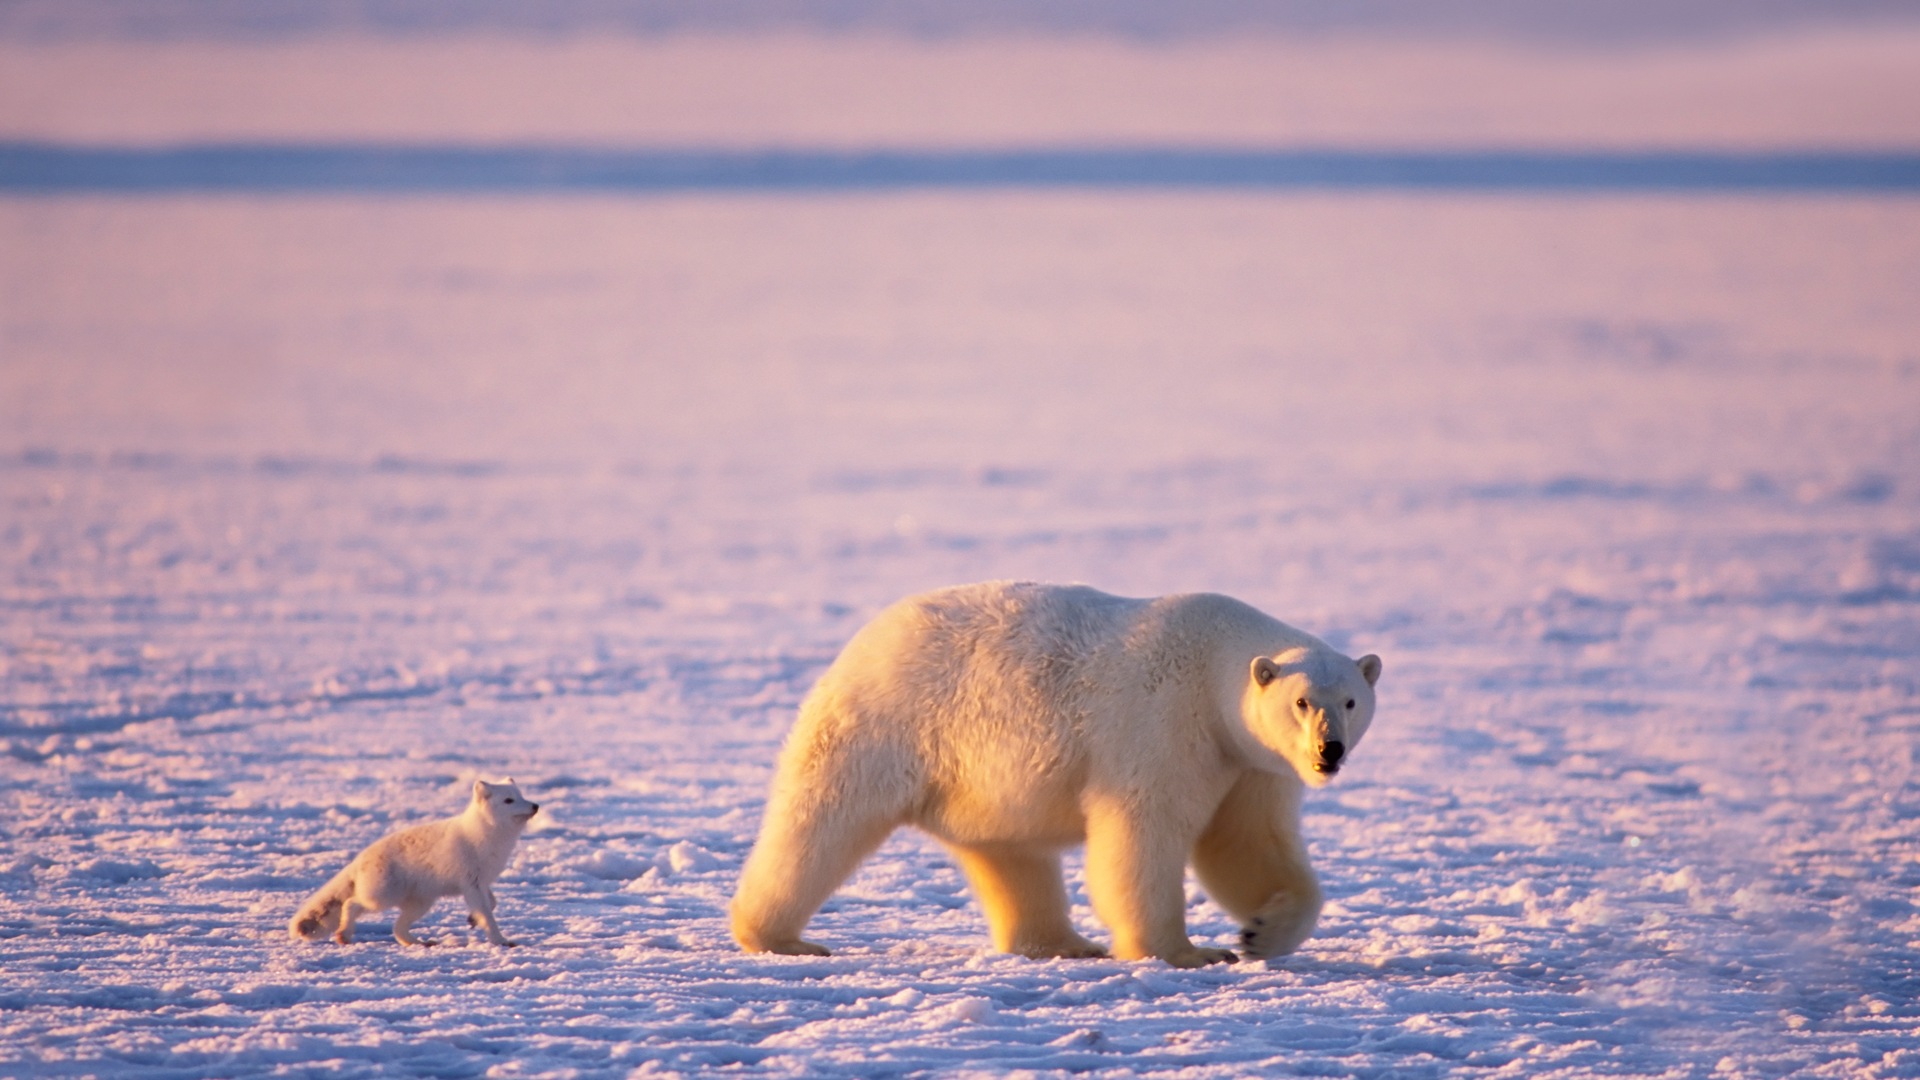 Windows 8 Wallpapers: Arctic, the nature ecological landscape, arctic animals #10 - 1920x1080